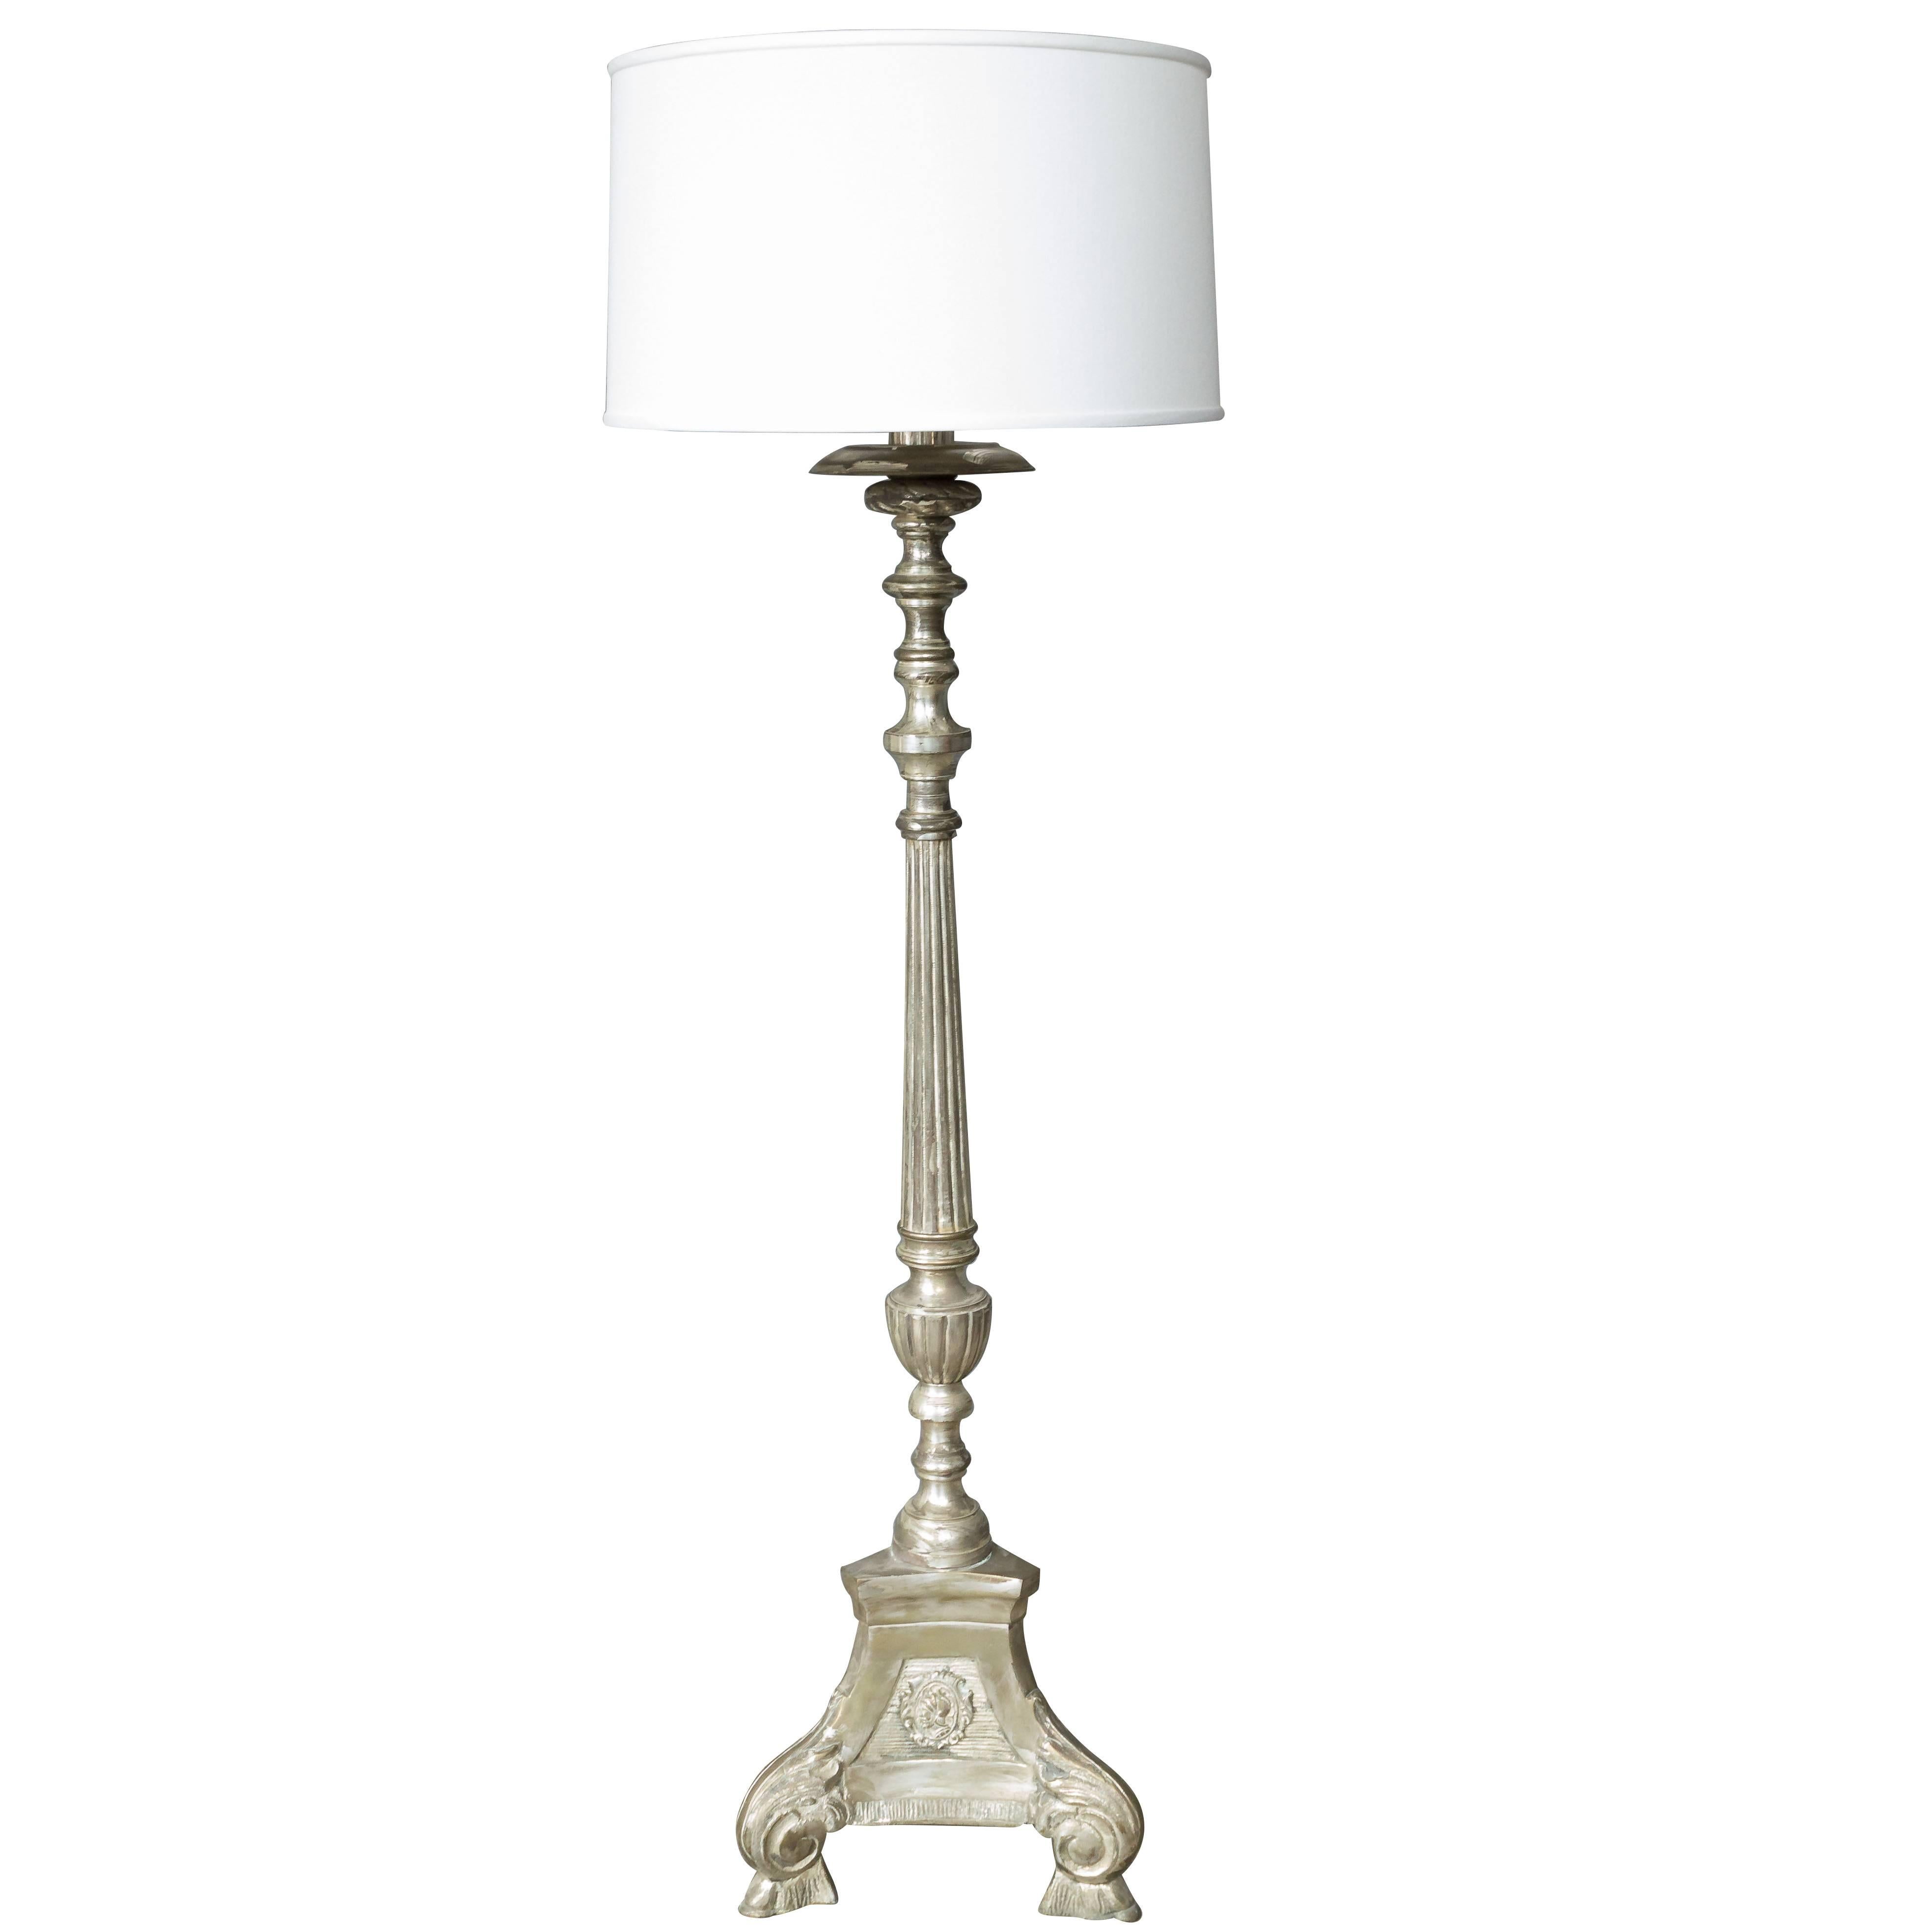 Spanish Silvered Floor Lamp in the Baroque Style